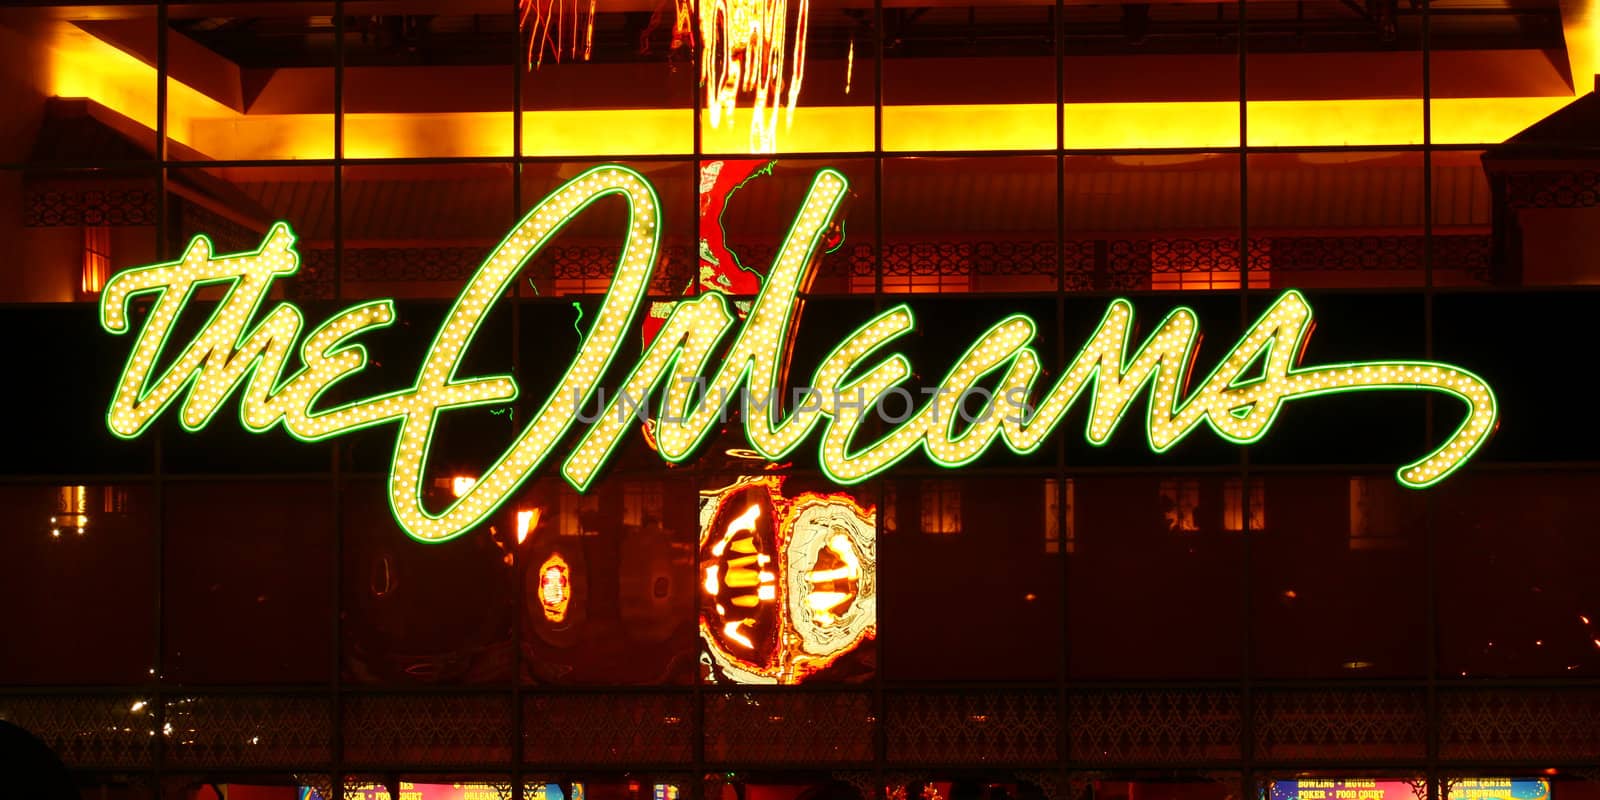 Las Vegas, USA - November 30, 2011: The lights of The Orleans Hotel and Casino Sign above the main entrance showcase the Mardi Gras theme of the property.  The Orleans was opened in Las Vegas, Nevada in the year 1996.